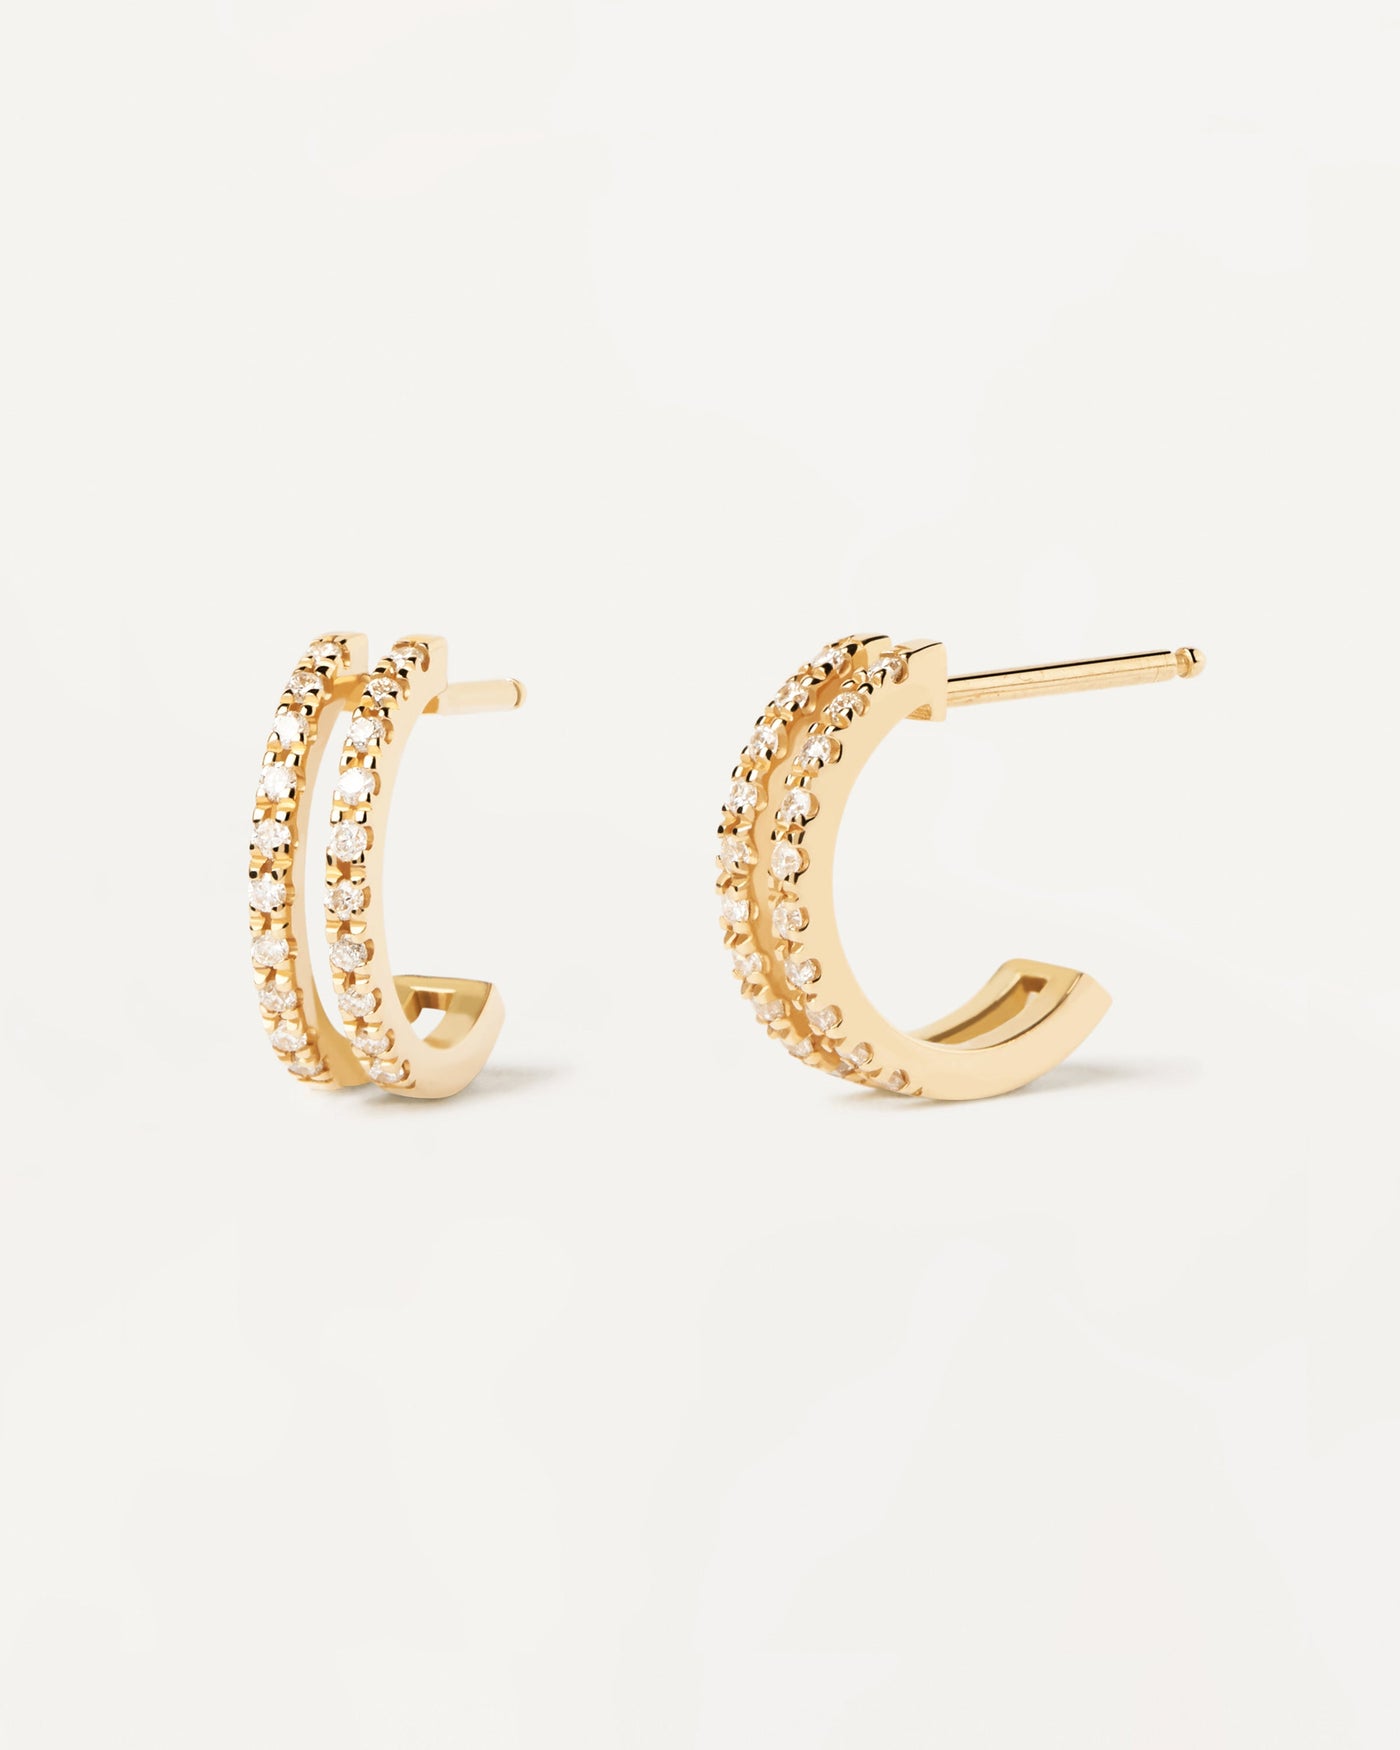 2023 Selection | Diamonds And Gold Dual Hoops. 18K yellow gold eternity earrings with 2 half hoops of lab-grown diamonds of 0.20 carat. Get the latest arrival from PDPAOLA. Place your order safely and get this Best Seller. Free Shipping.